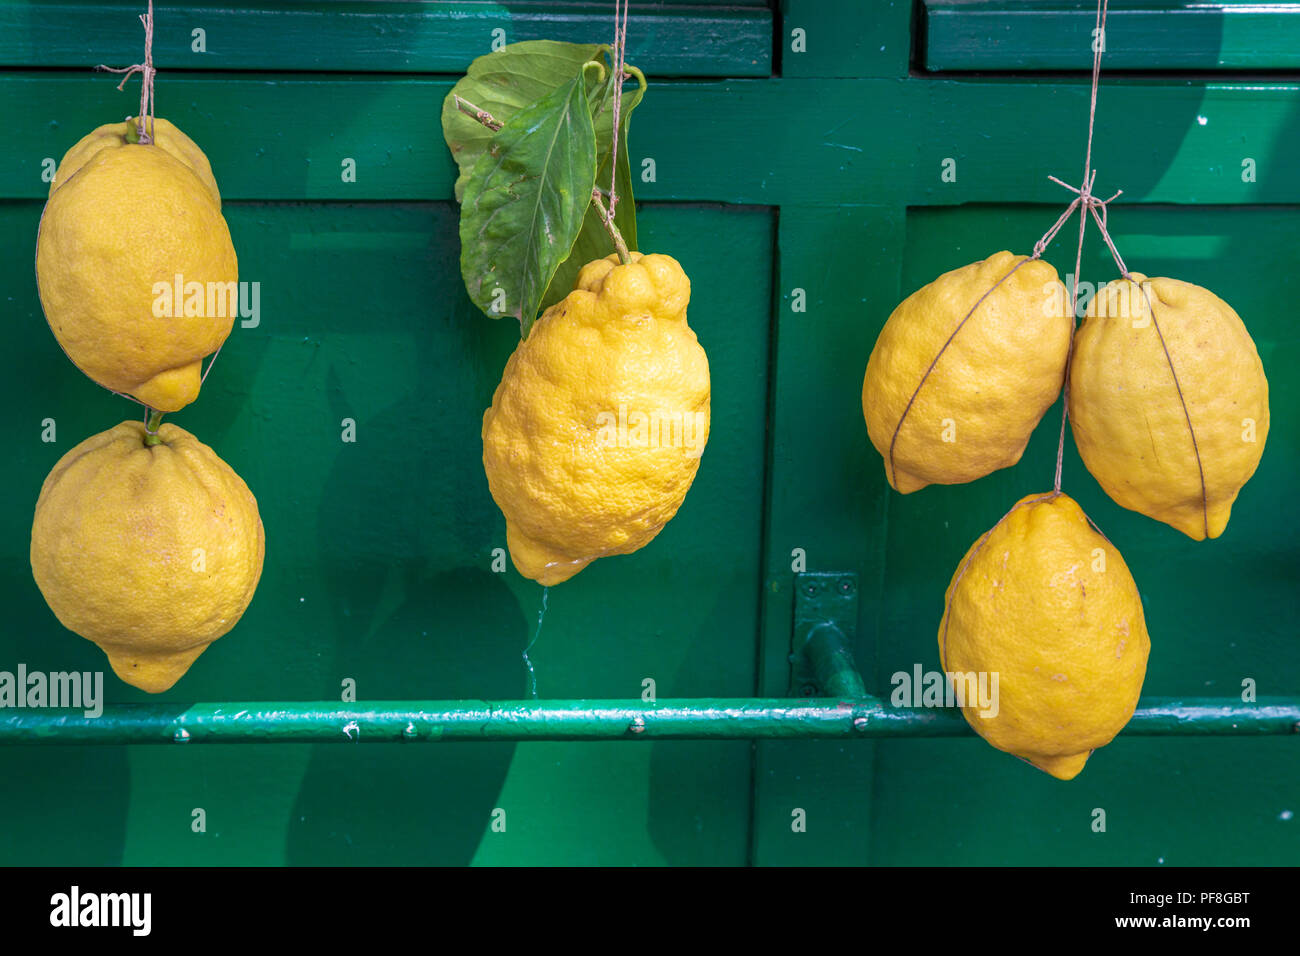 Lemons for sale hanging against a green background. Stock Photo